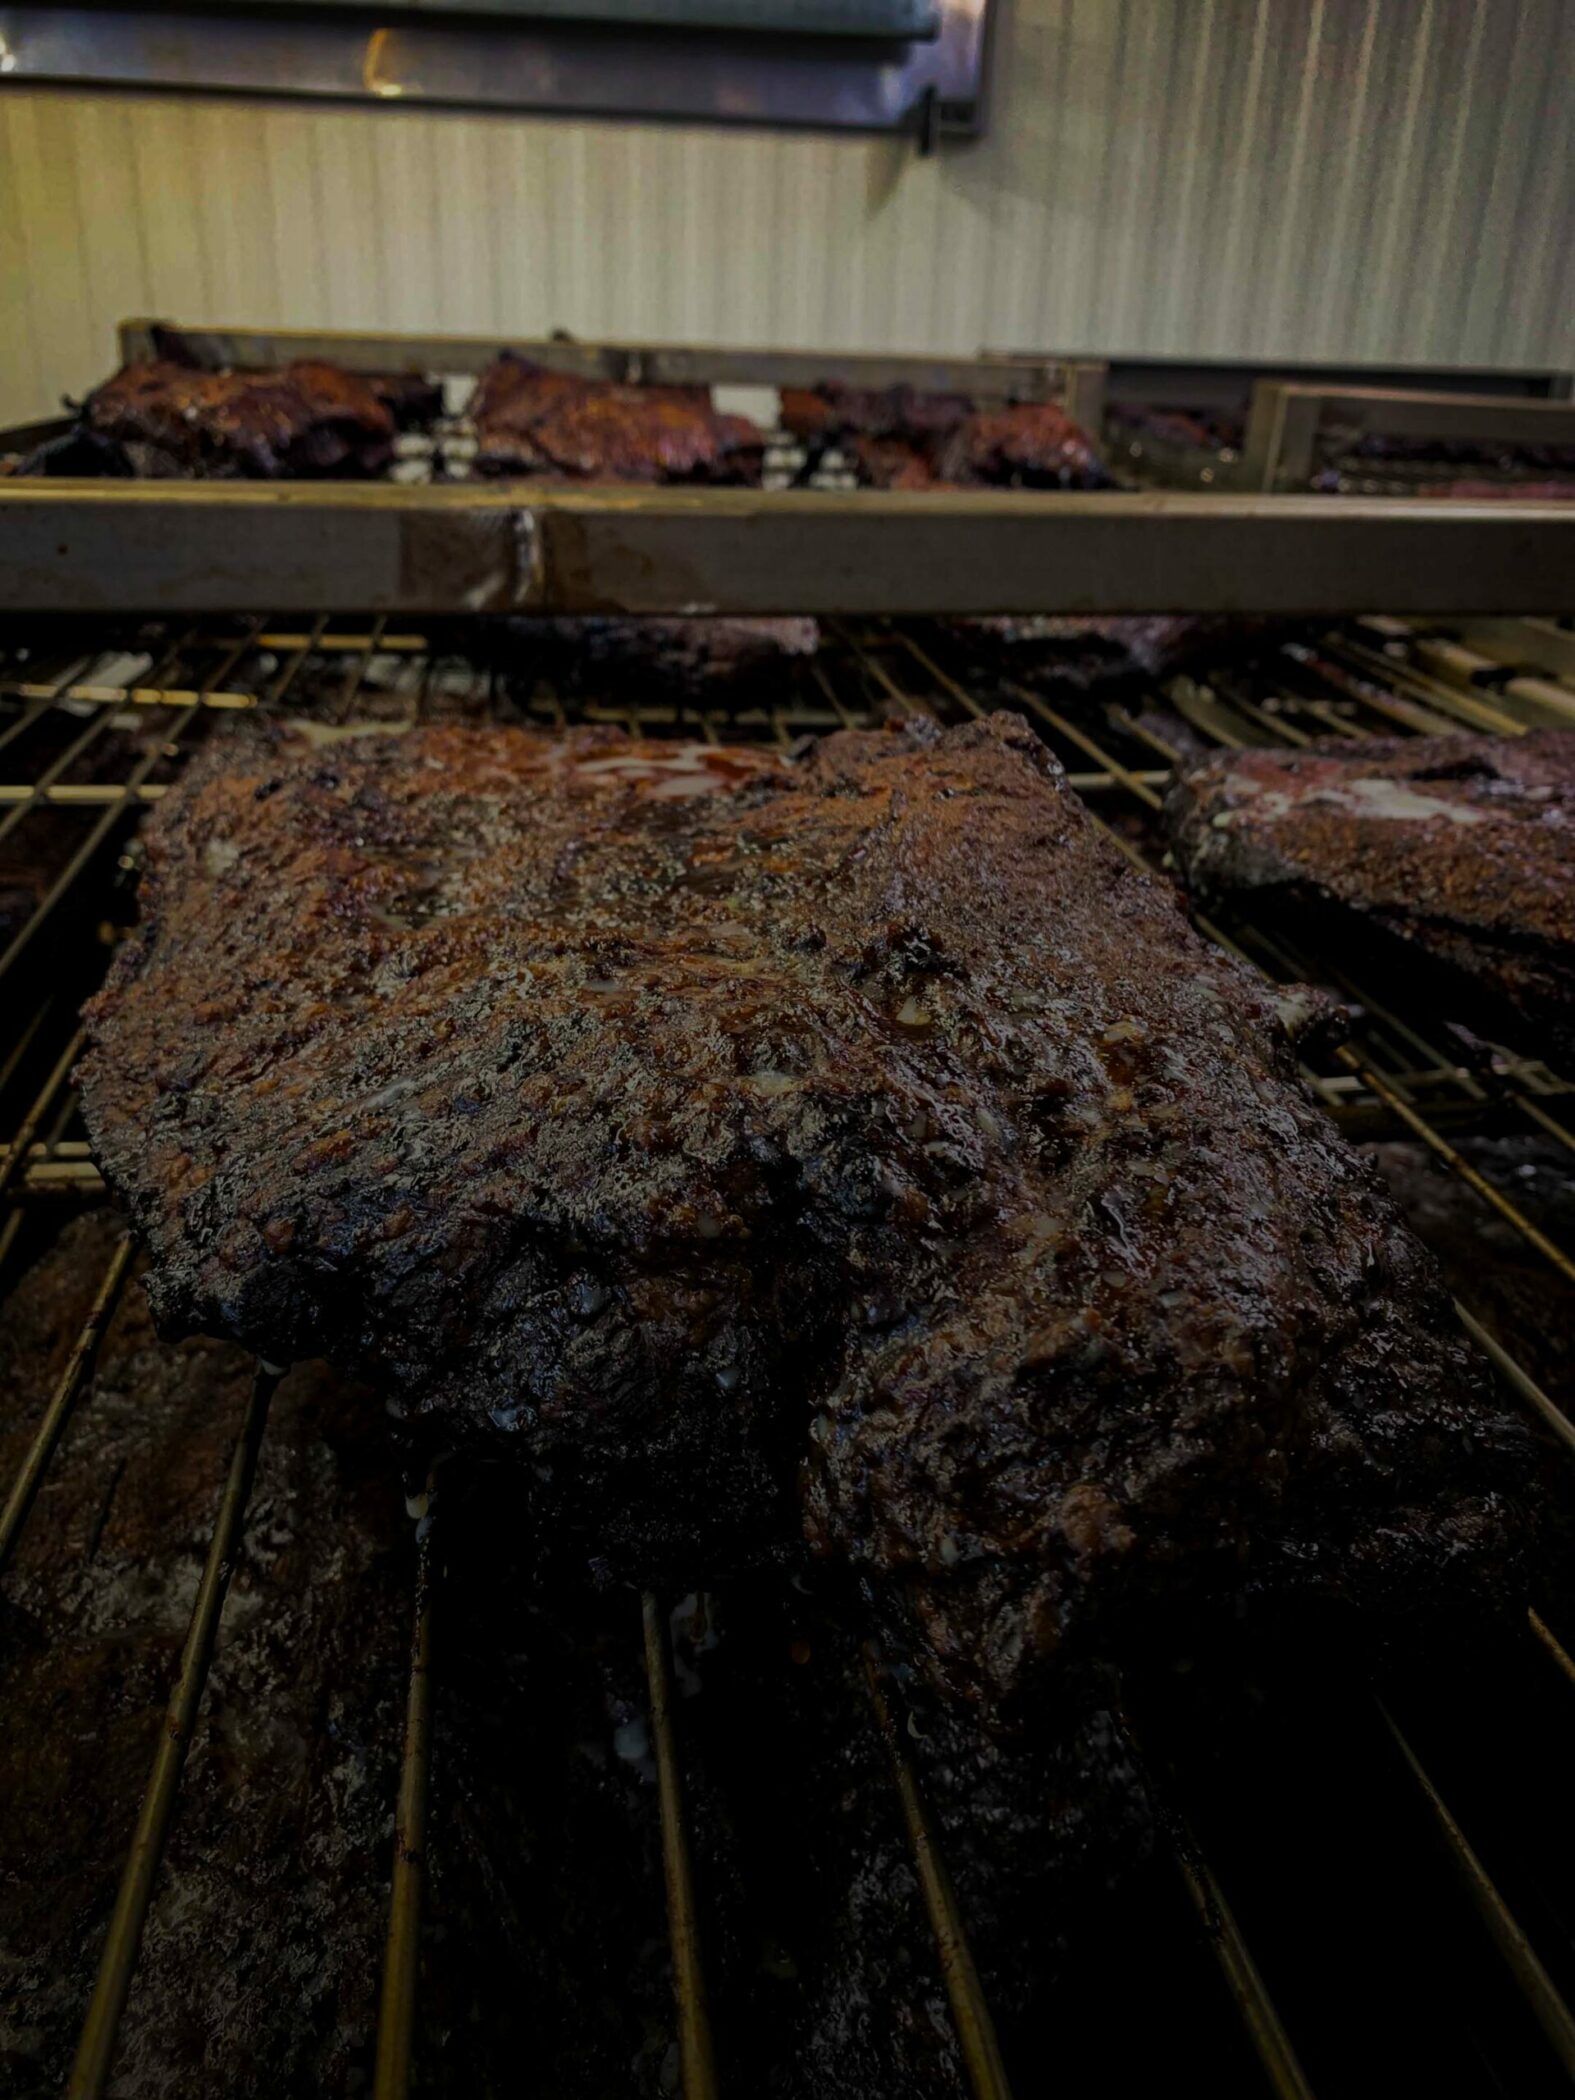 Close-up image of a large piece of meat being smoked on a grill with more pieces cooking in the background. The meat has a dark, crispy exterior, indicating it has been well-cooked and smoked to perfection. This delicious scene unfolds at an Iowa indoor barbecue pit, known for its WG-Provisions quality meats.